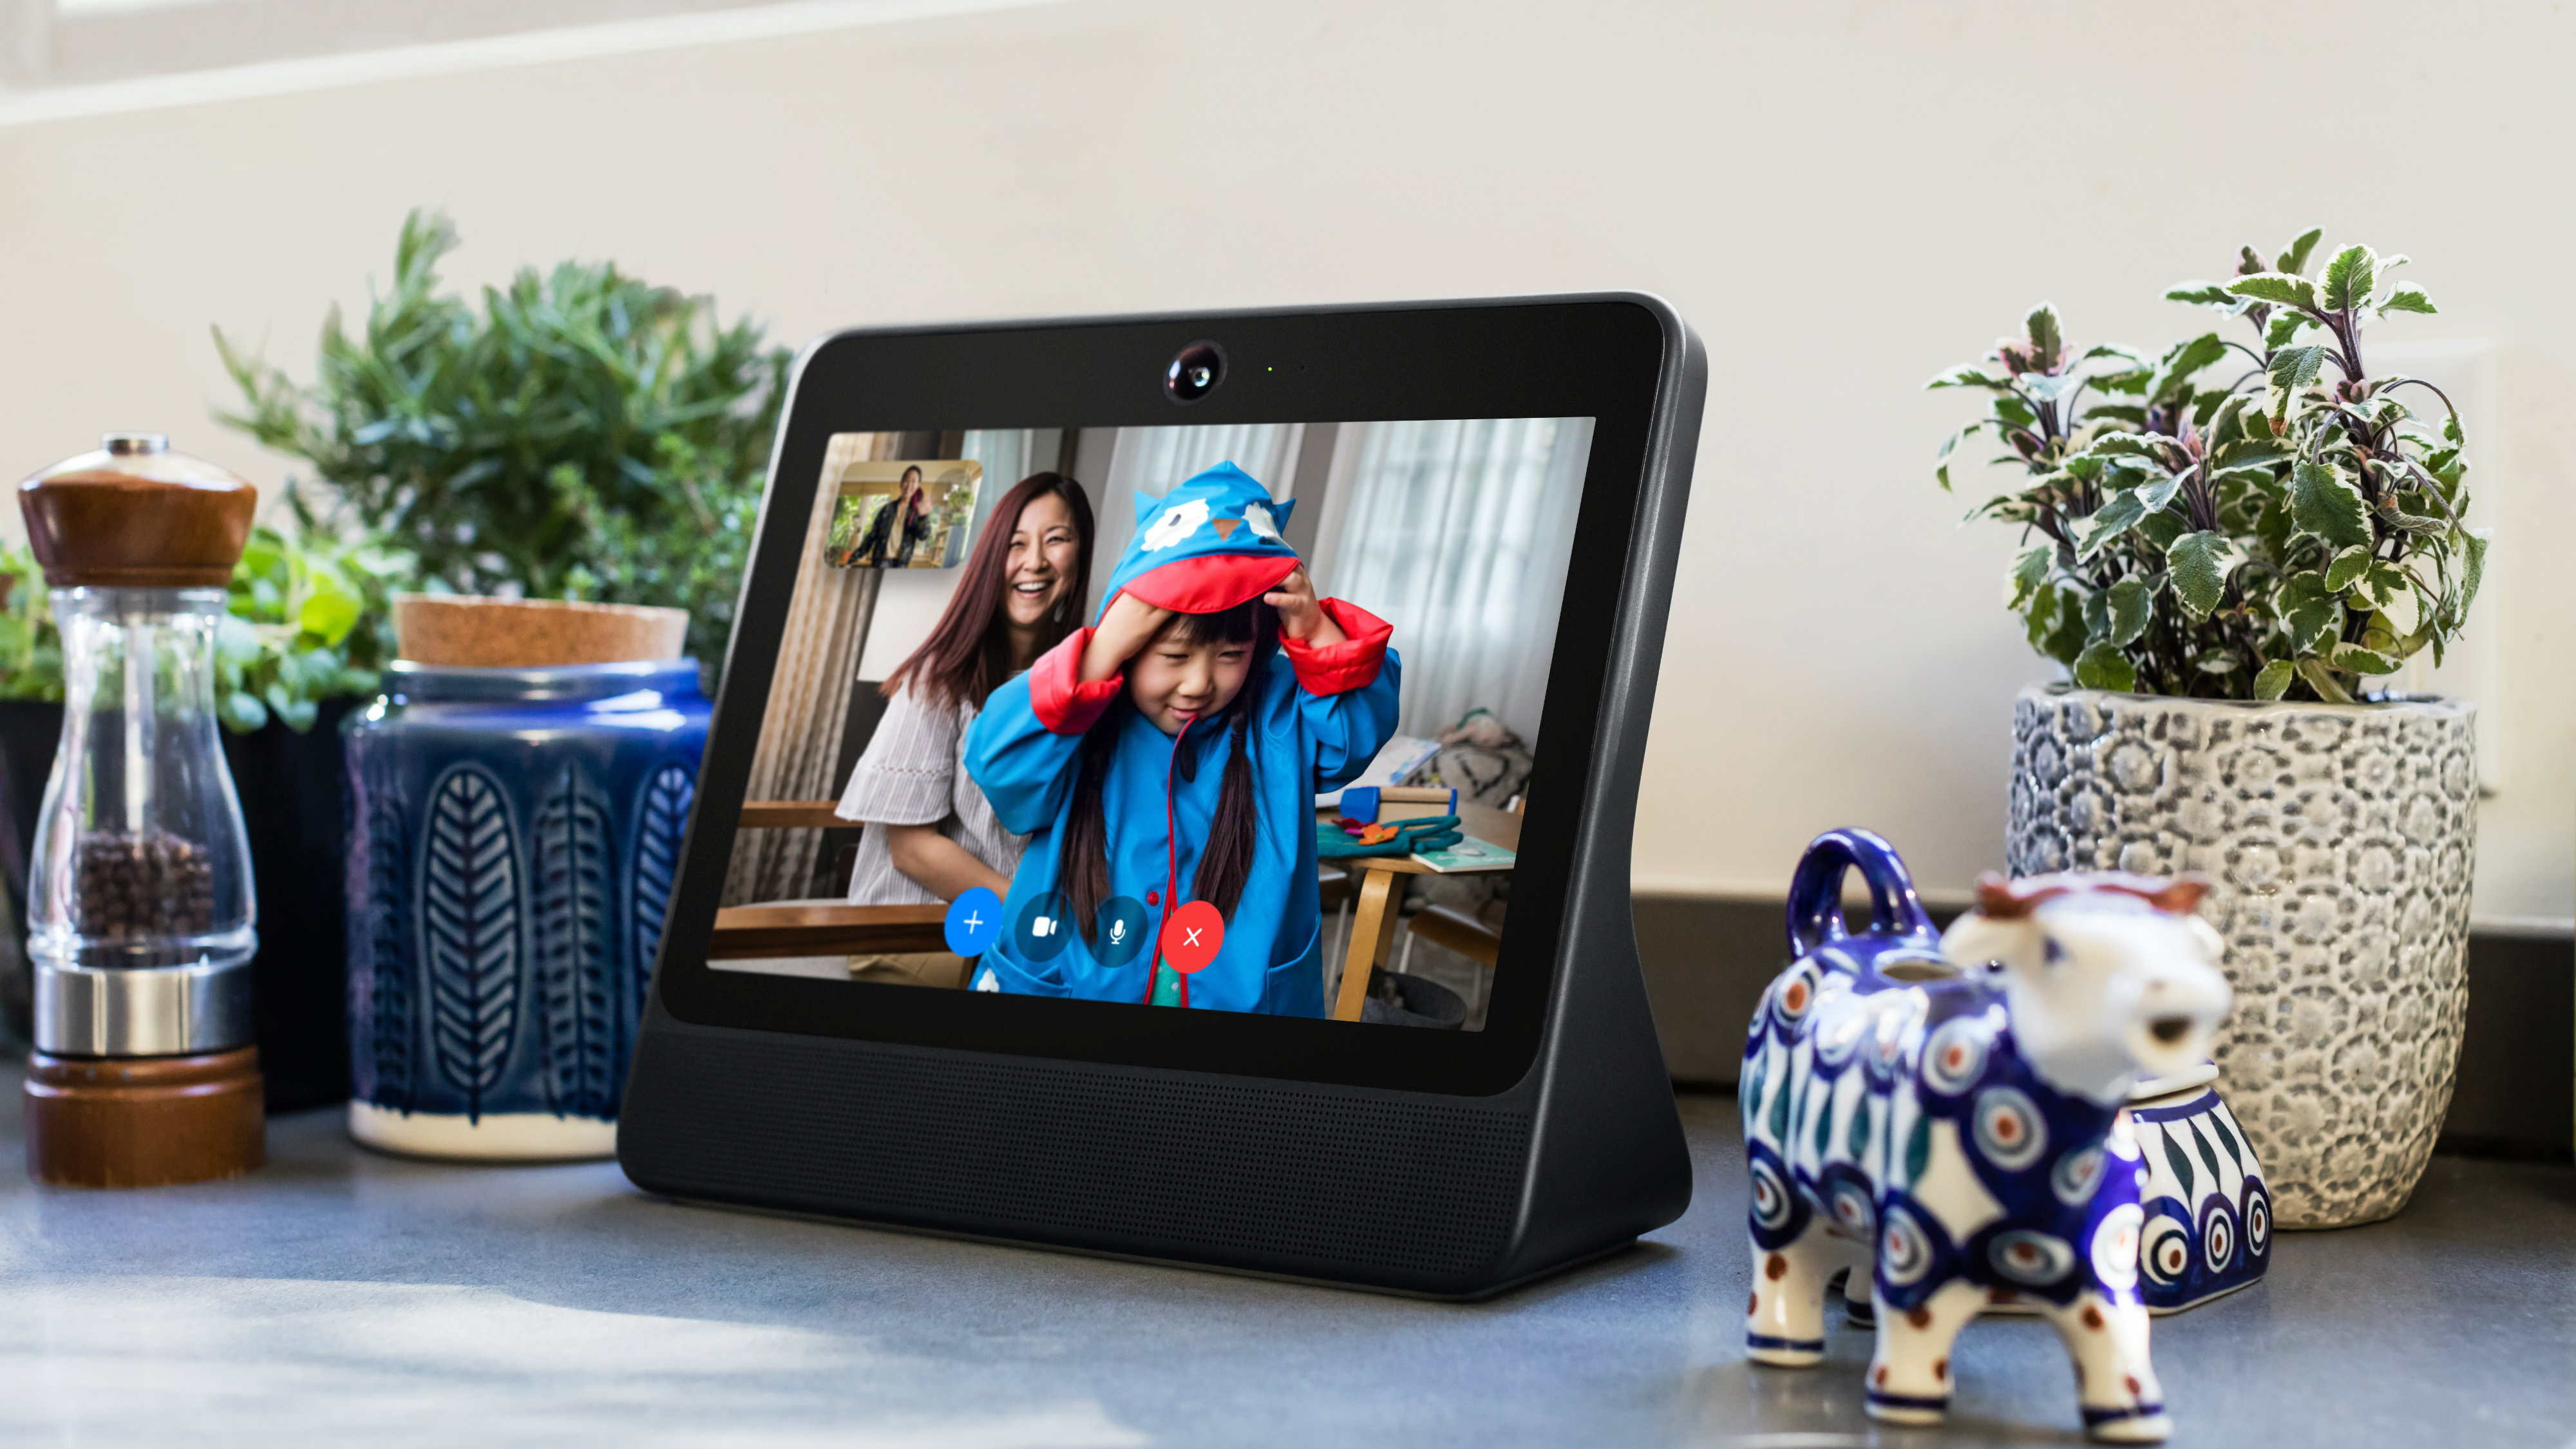 facebook-portal-smart-displays-are-at-their-lowest-price-yet-in-amazon